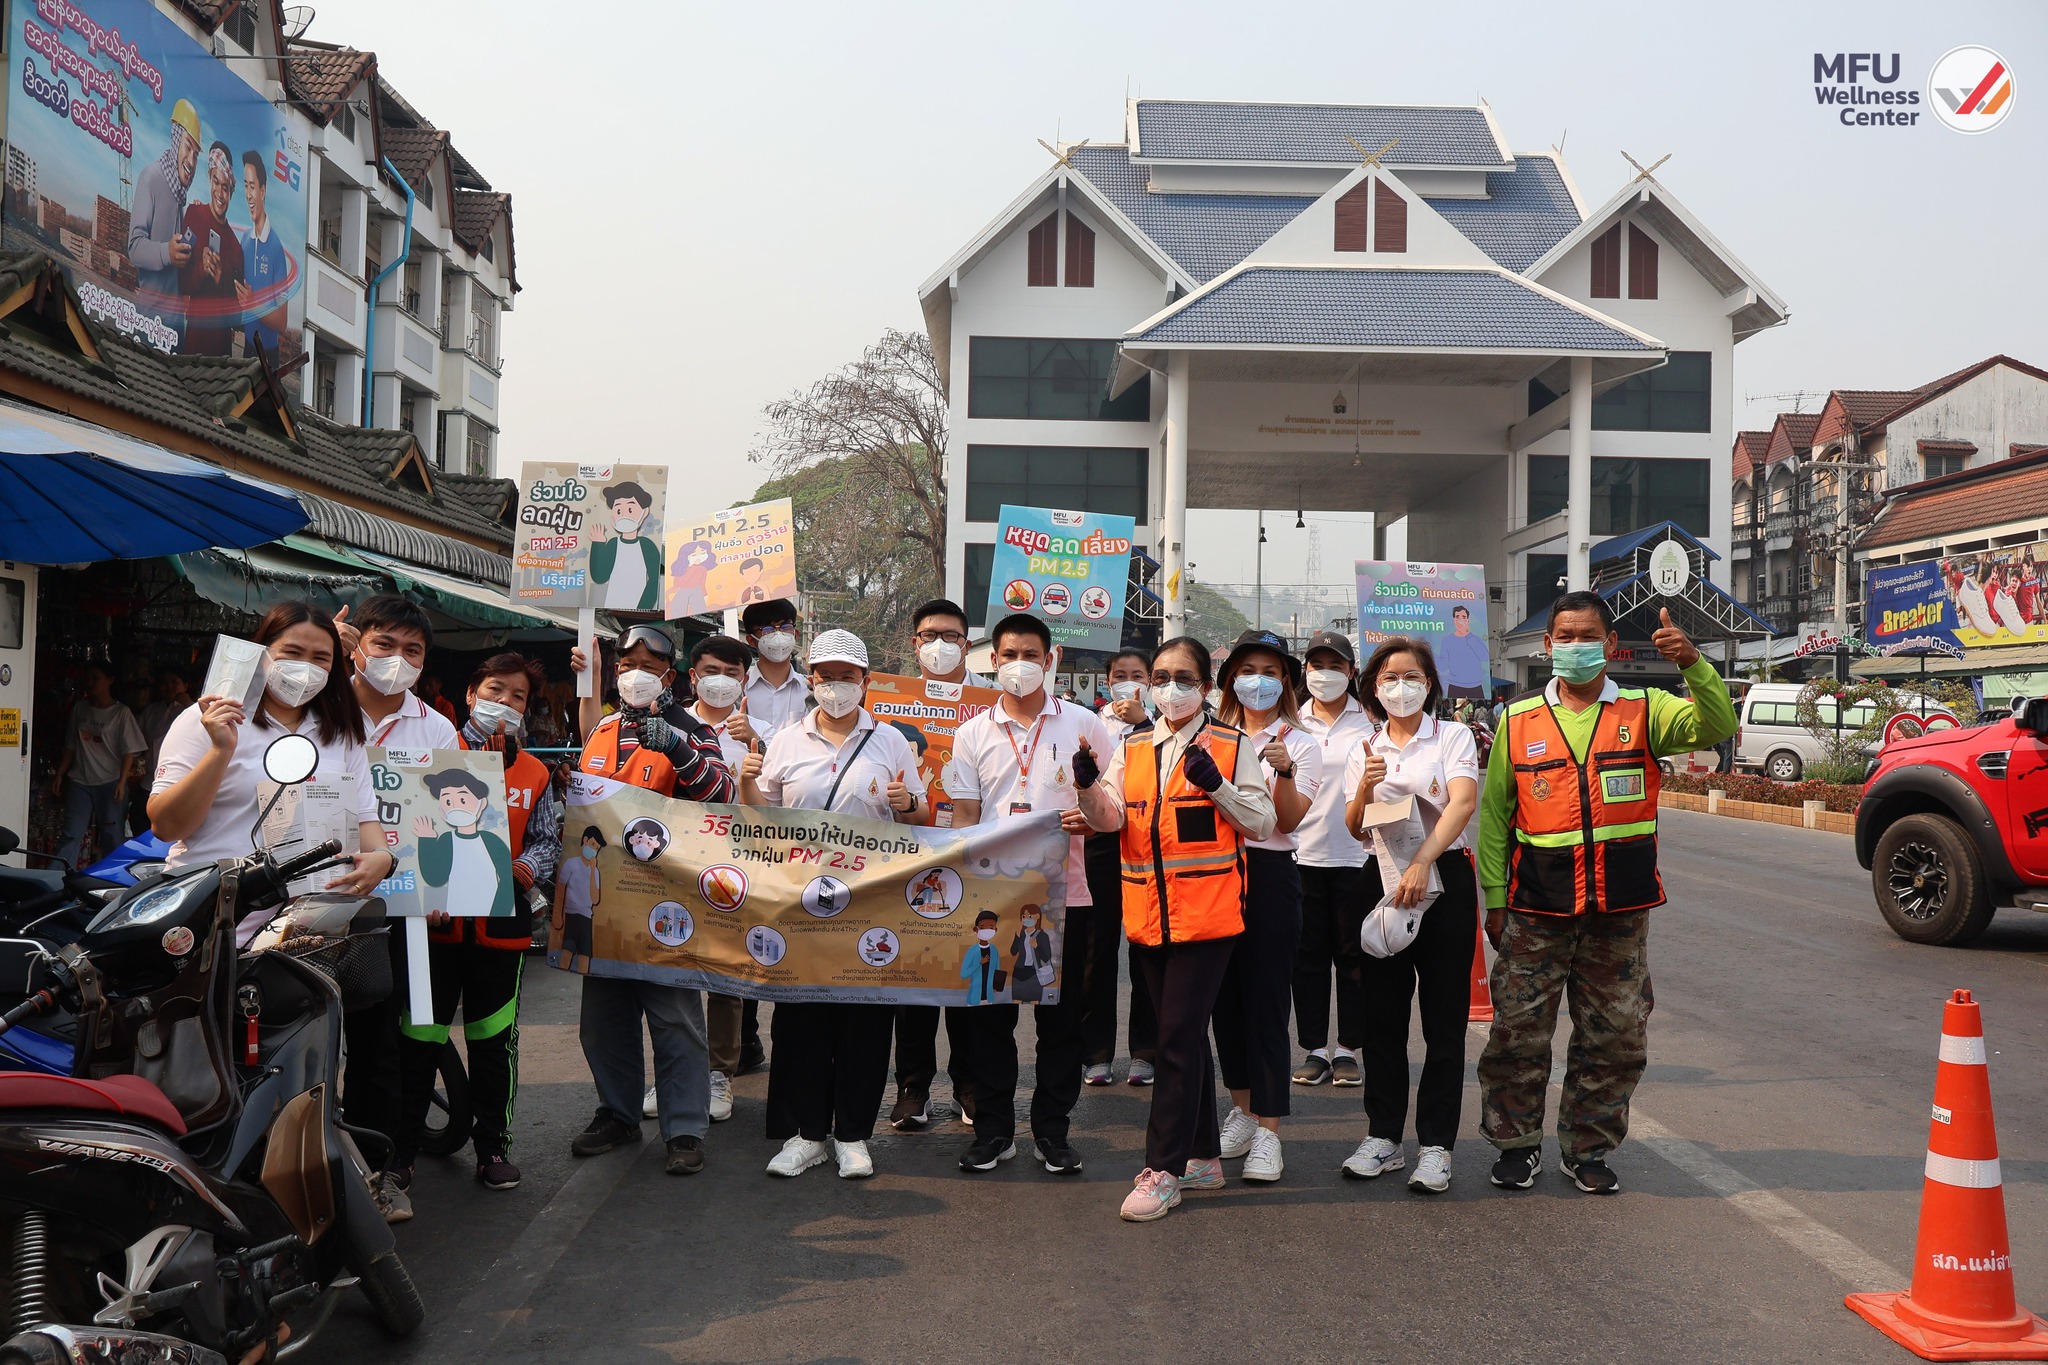 MFU Wellness Center Visits Communities to Promote How to Prevent Health Related Conditions Caused by PM2.5